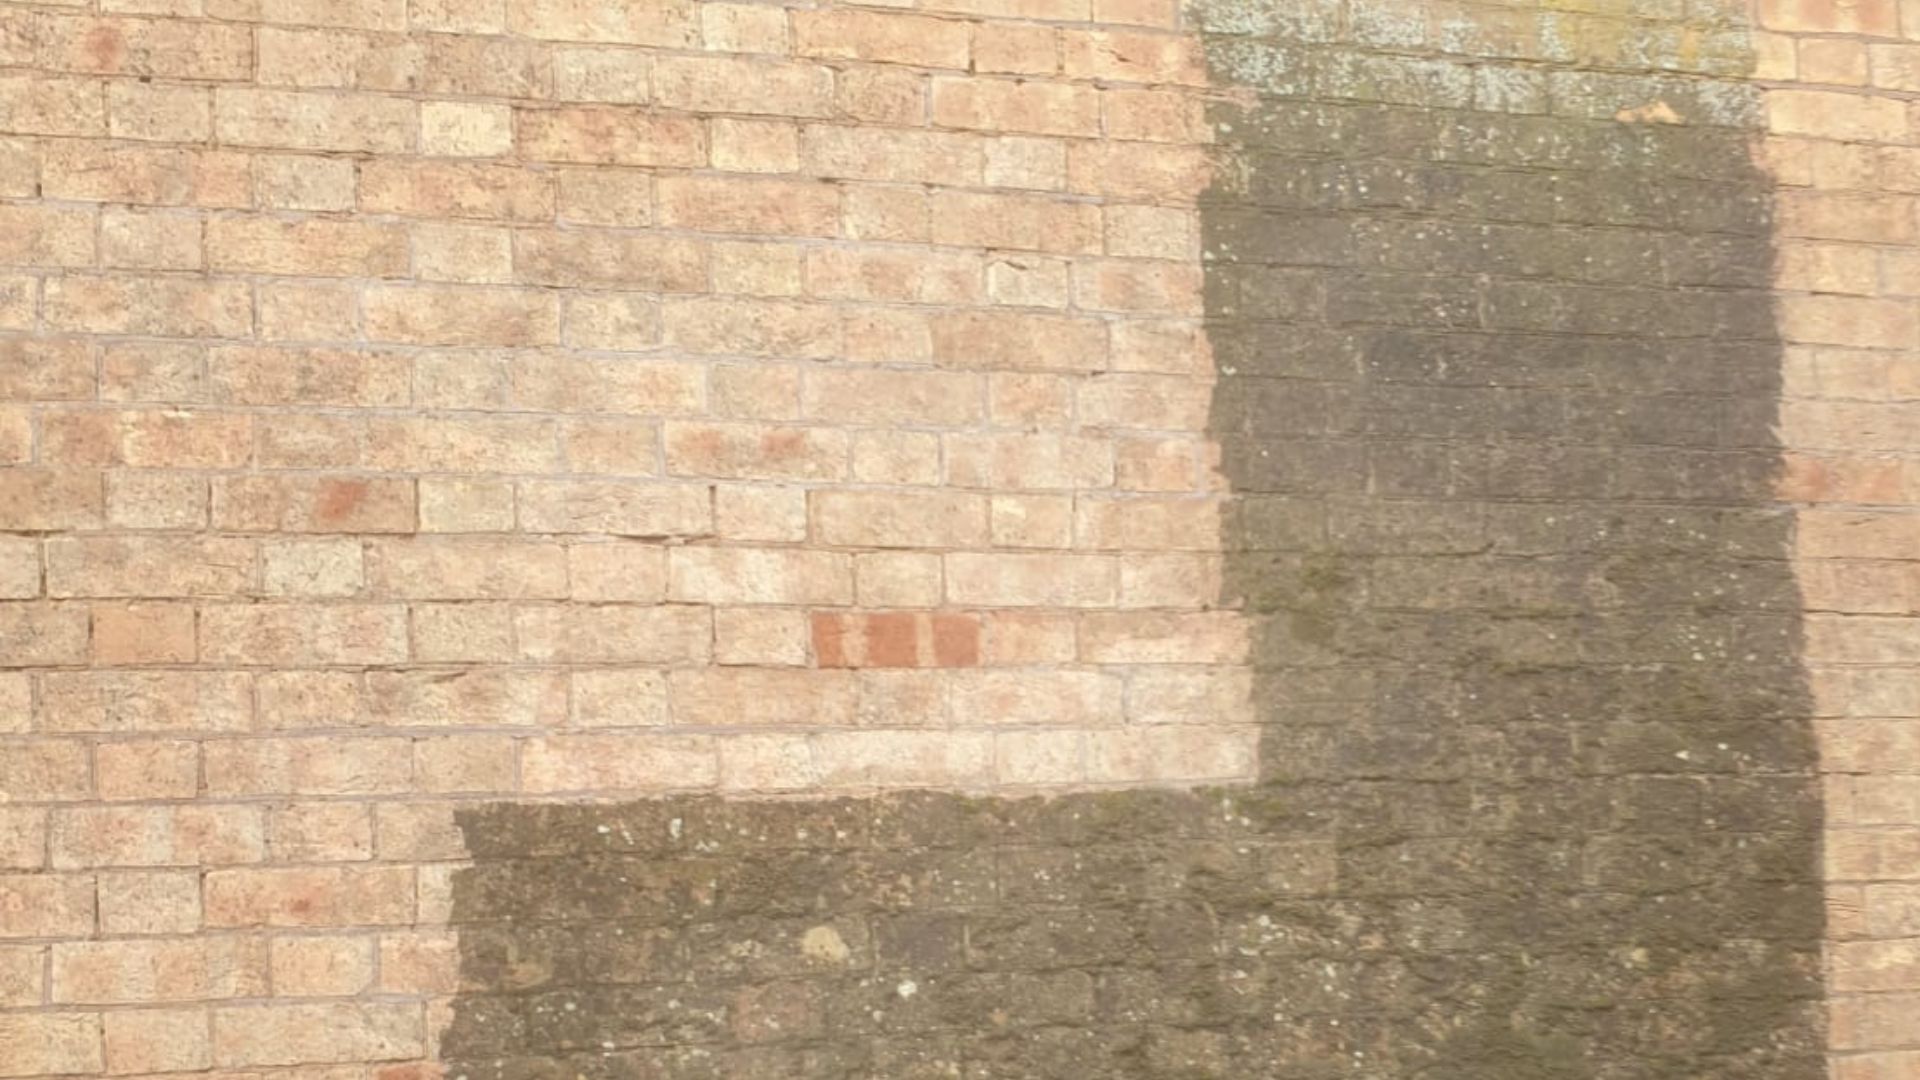 A brick wall partially covered in dirt and grime to show how clean it can be with professional cleaning.